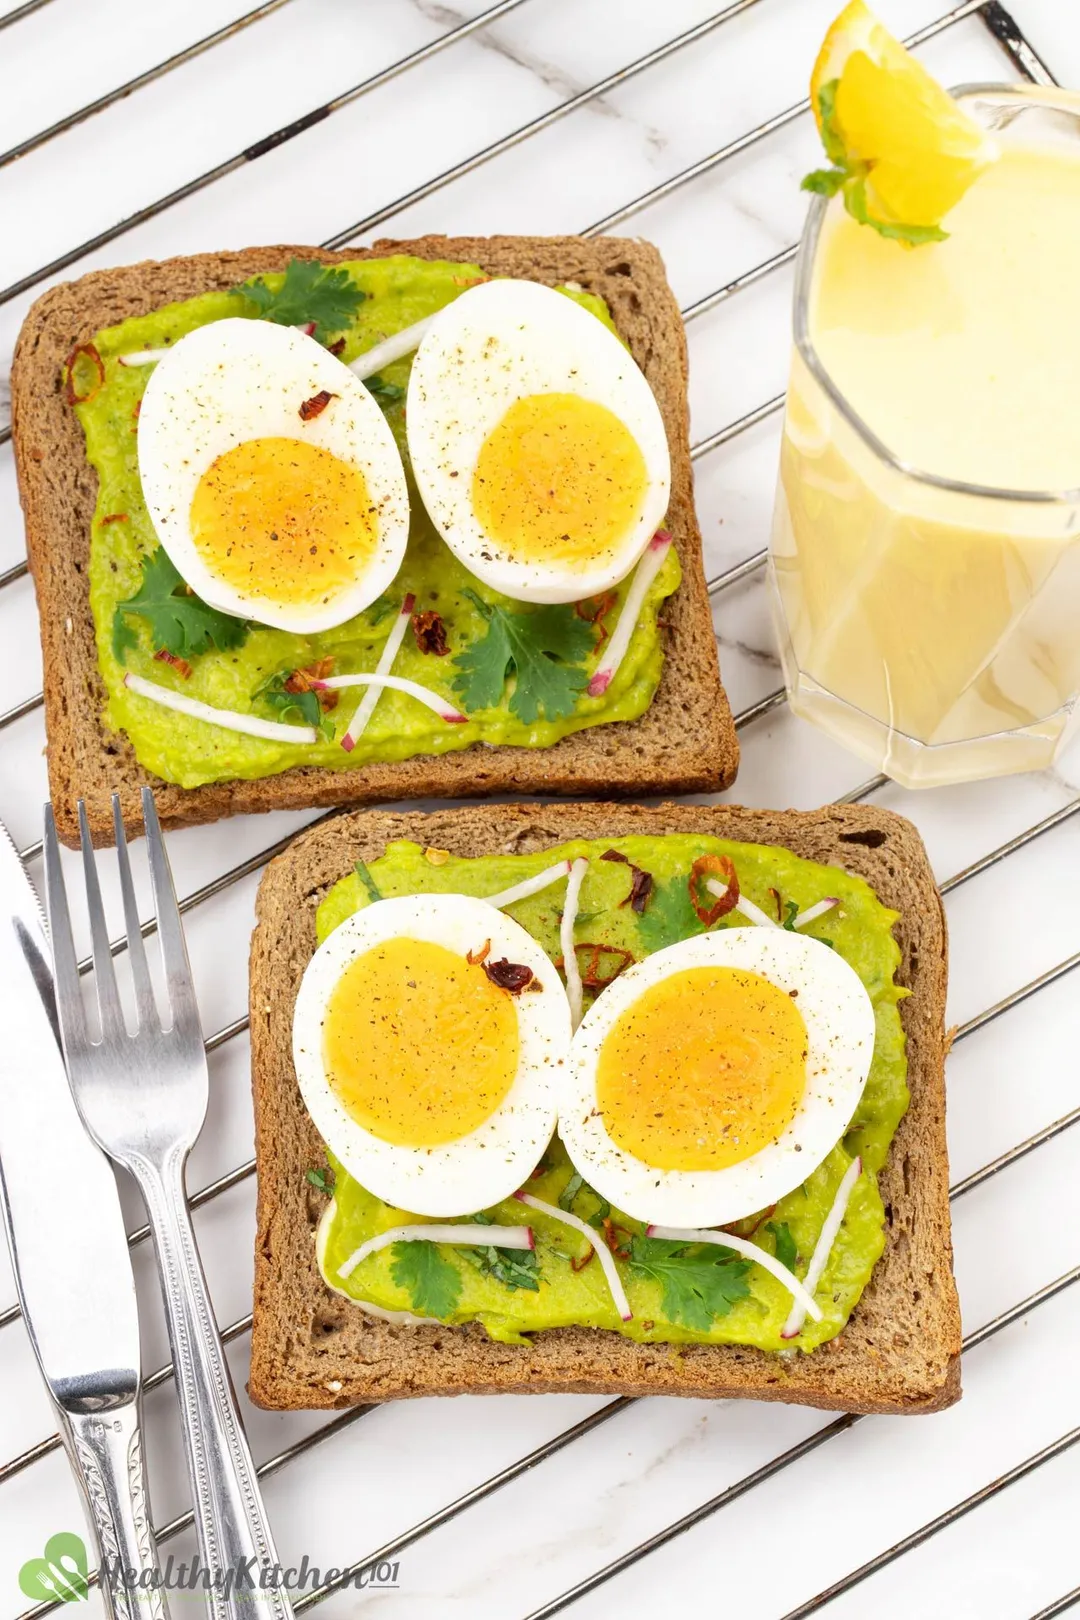 four half of boiled egg on two pieces of sandwich with mashed avocado on it a knife and fork, and a glass of milk for decorate